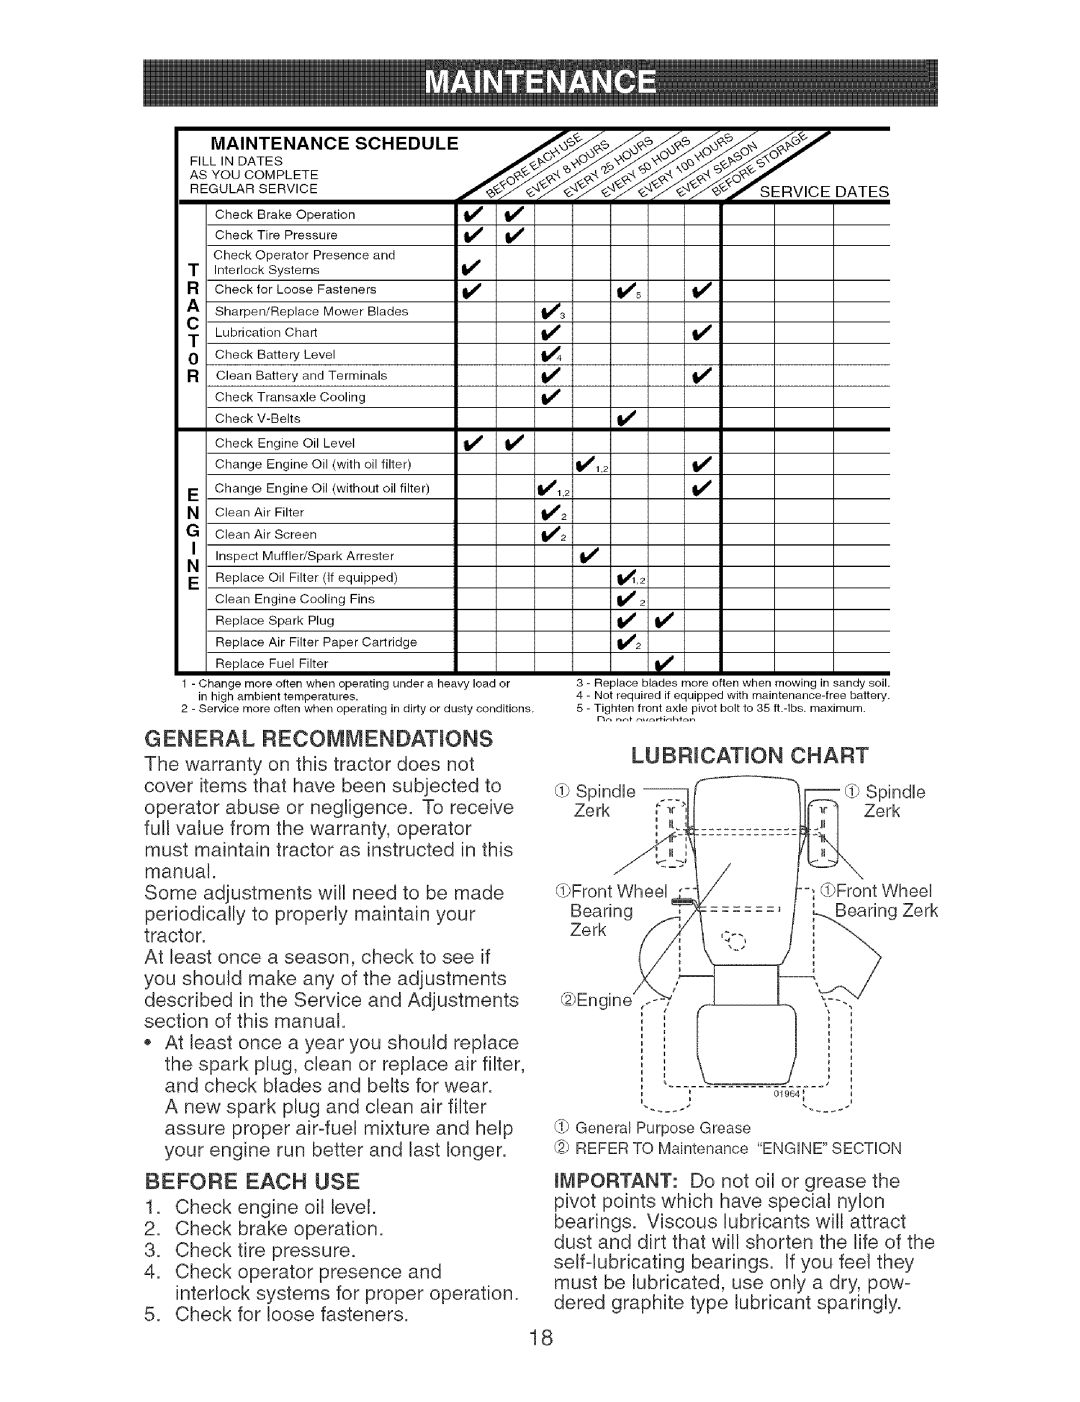 Craftsman 917.27404 owner manual Before Each Use, LUBRmCATmON CHART, Maintenance, Schedule 